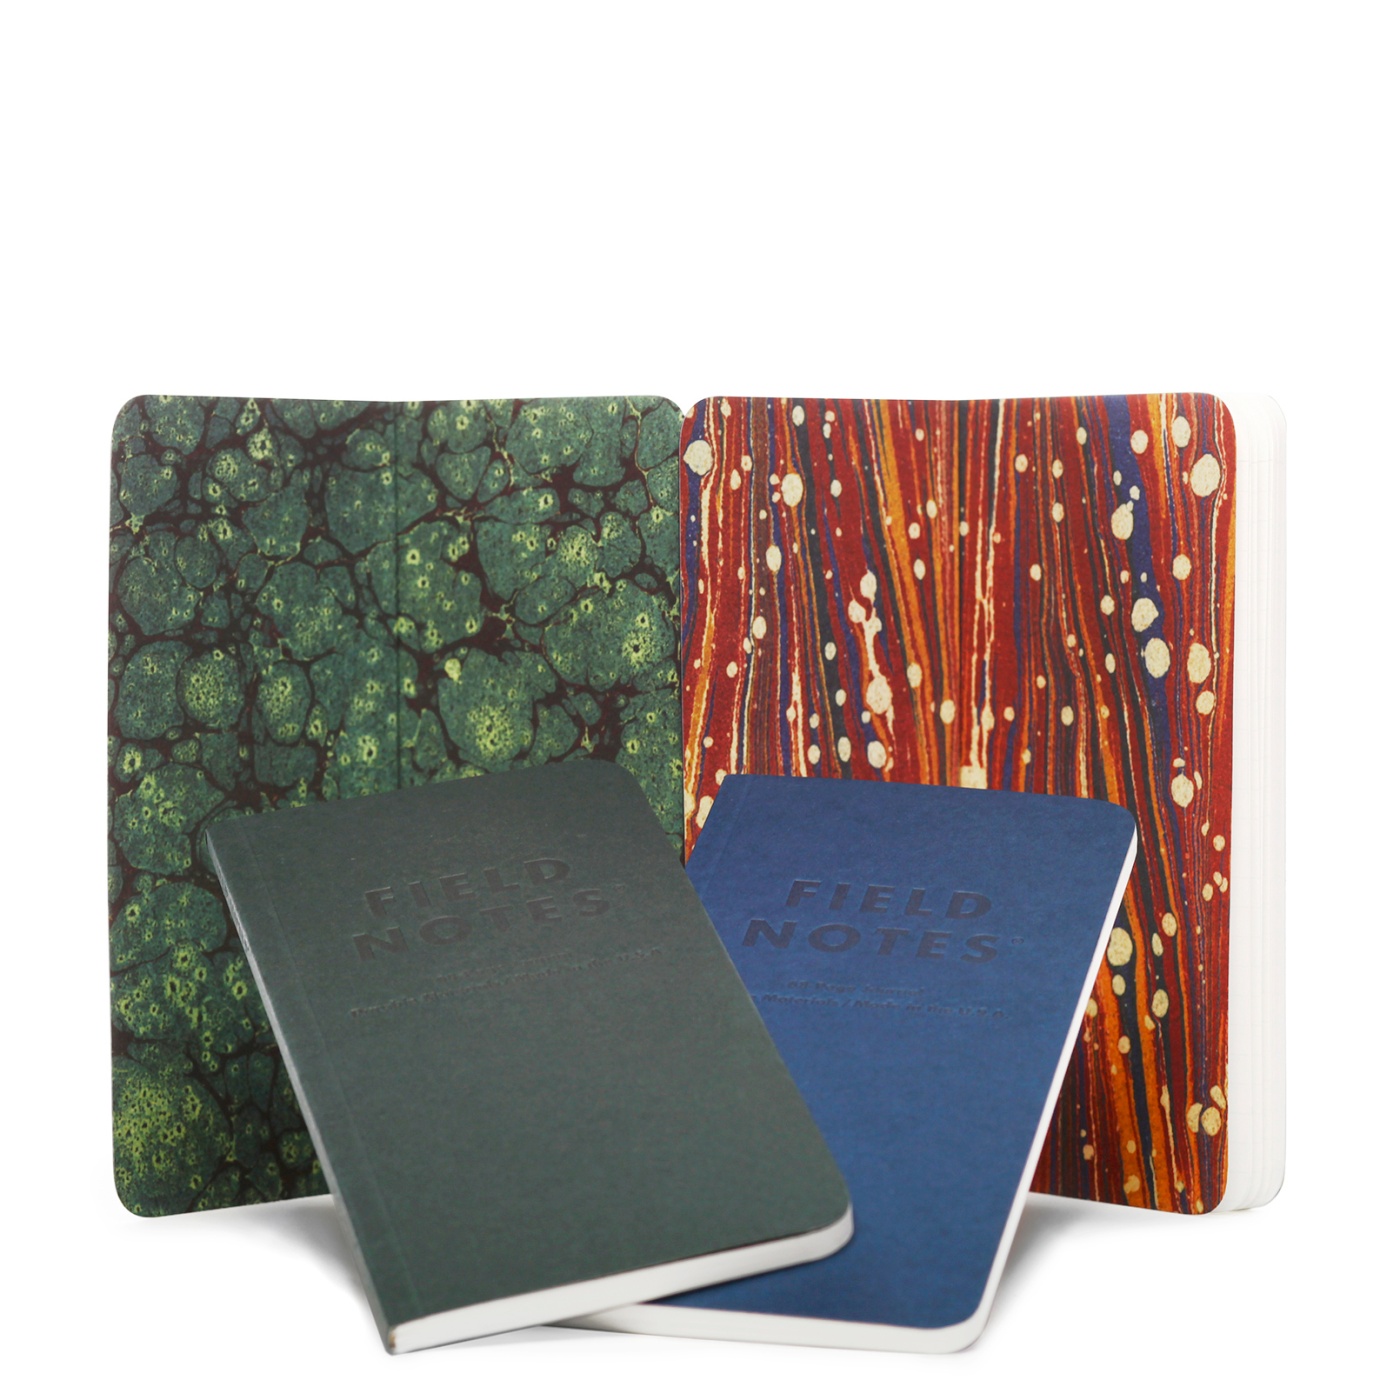 End Papers 2-pack in the group Paper & Pads / Note & Memo / Notebooks & Journals at Pen Store (101434)